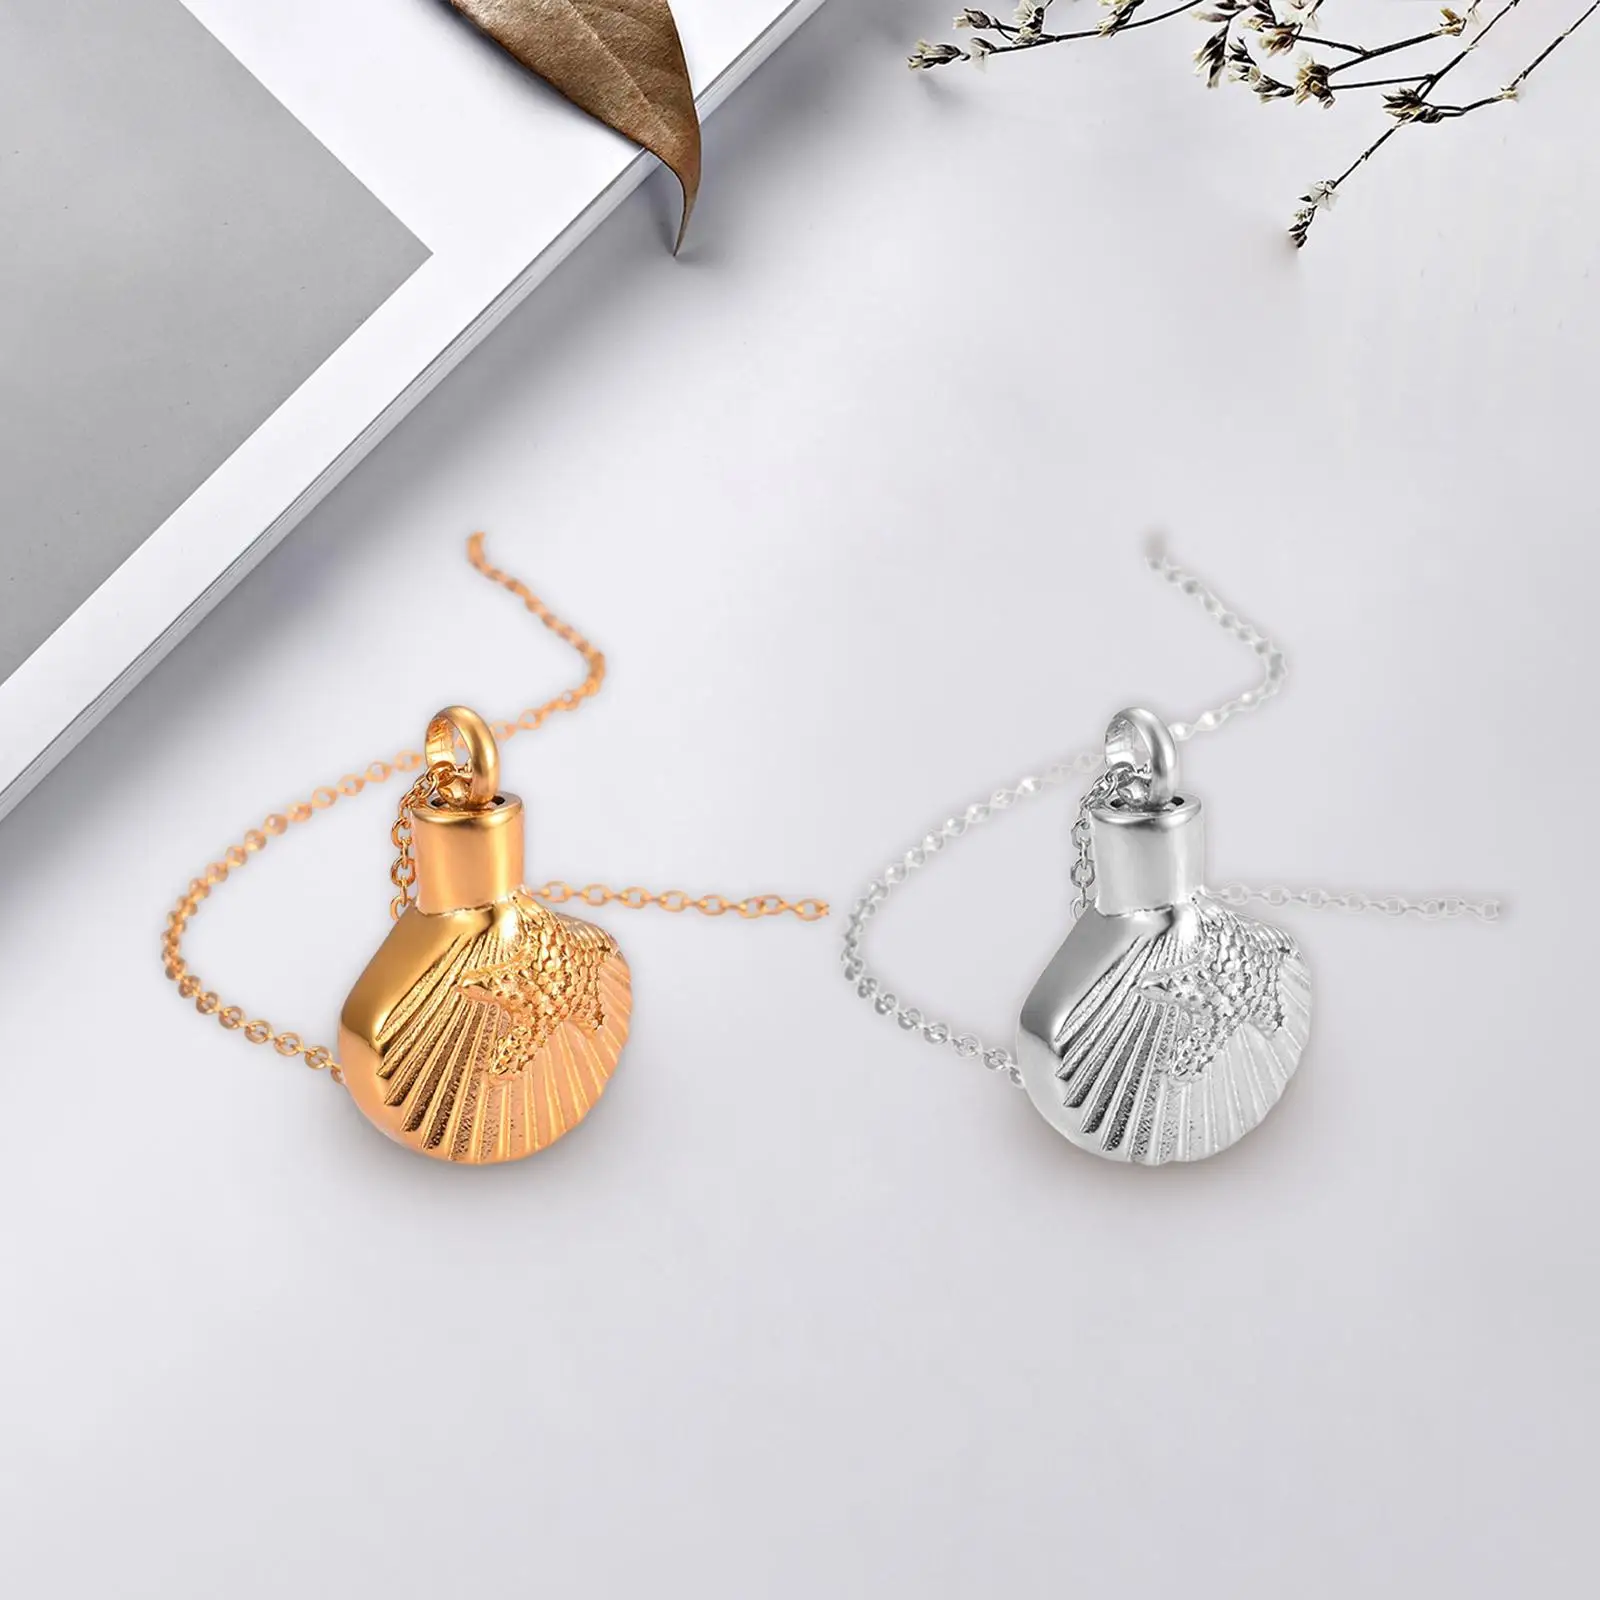 Cremation Necklace Stainless Steel Cremation Pendant Keepsake Pendant Ashes Jewelry for Ashes Mom and Dad Women Men Friends